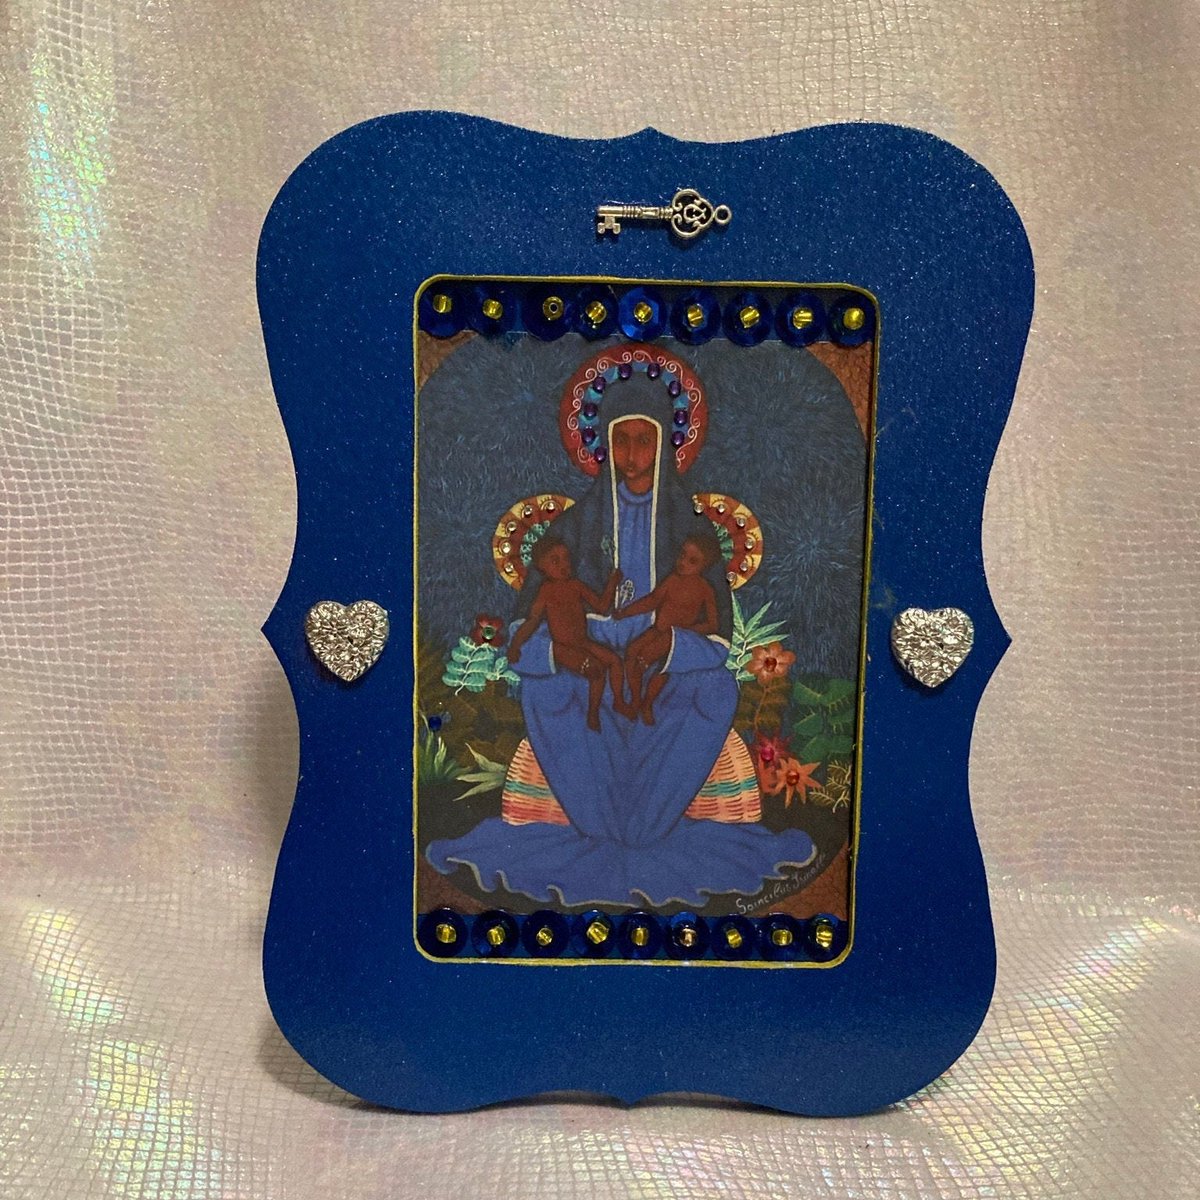 Excited to share the latest addition to my #etsy shop: Erzuli Dantor altar piece etsy.me/432P4W3 #blue #erzulidantor #dantor #altarpiece #altar #religiousart #vodouart #religious #vodou